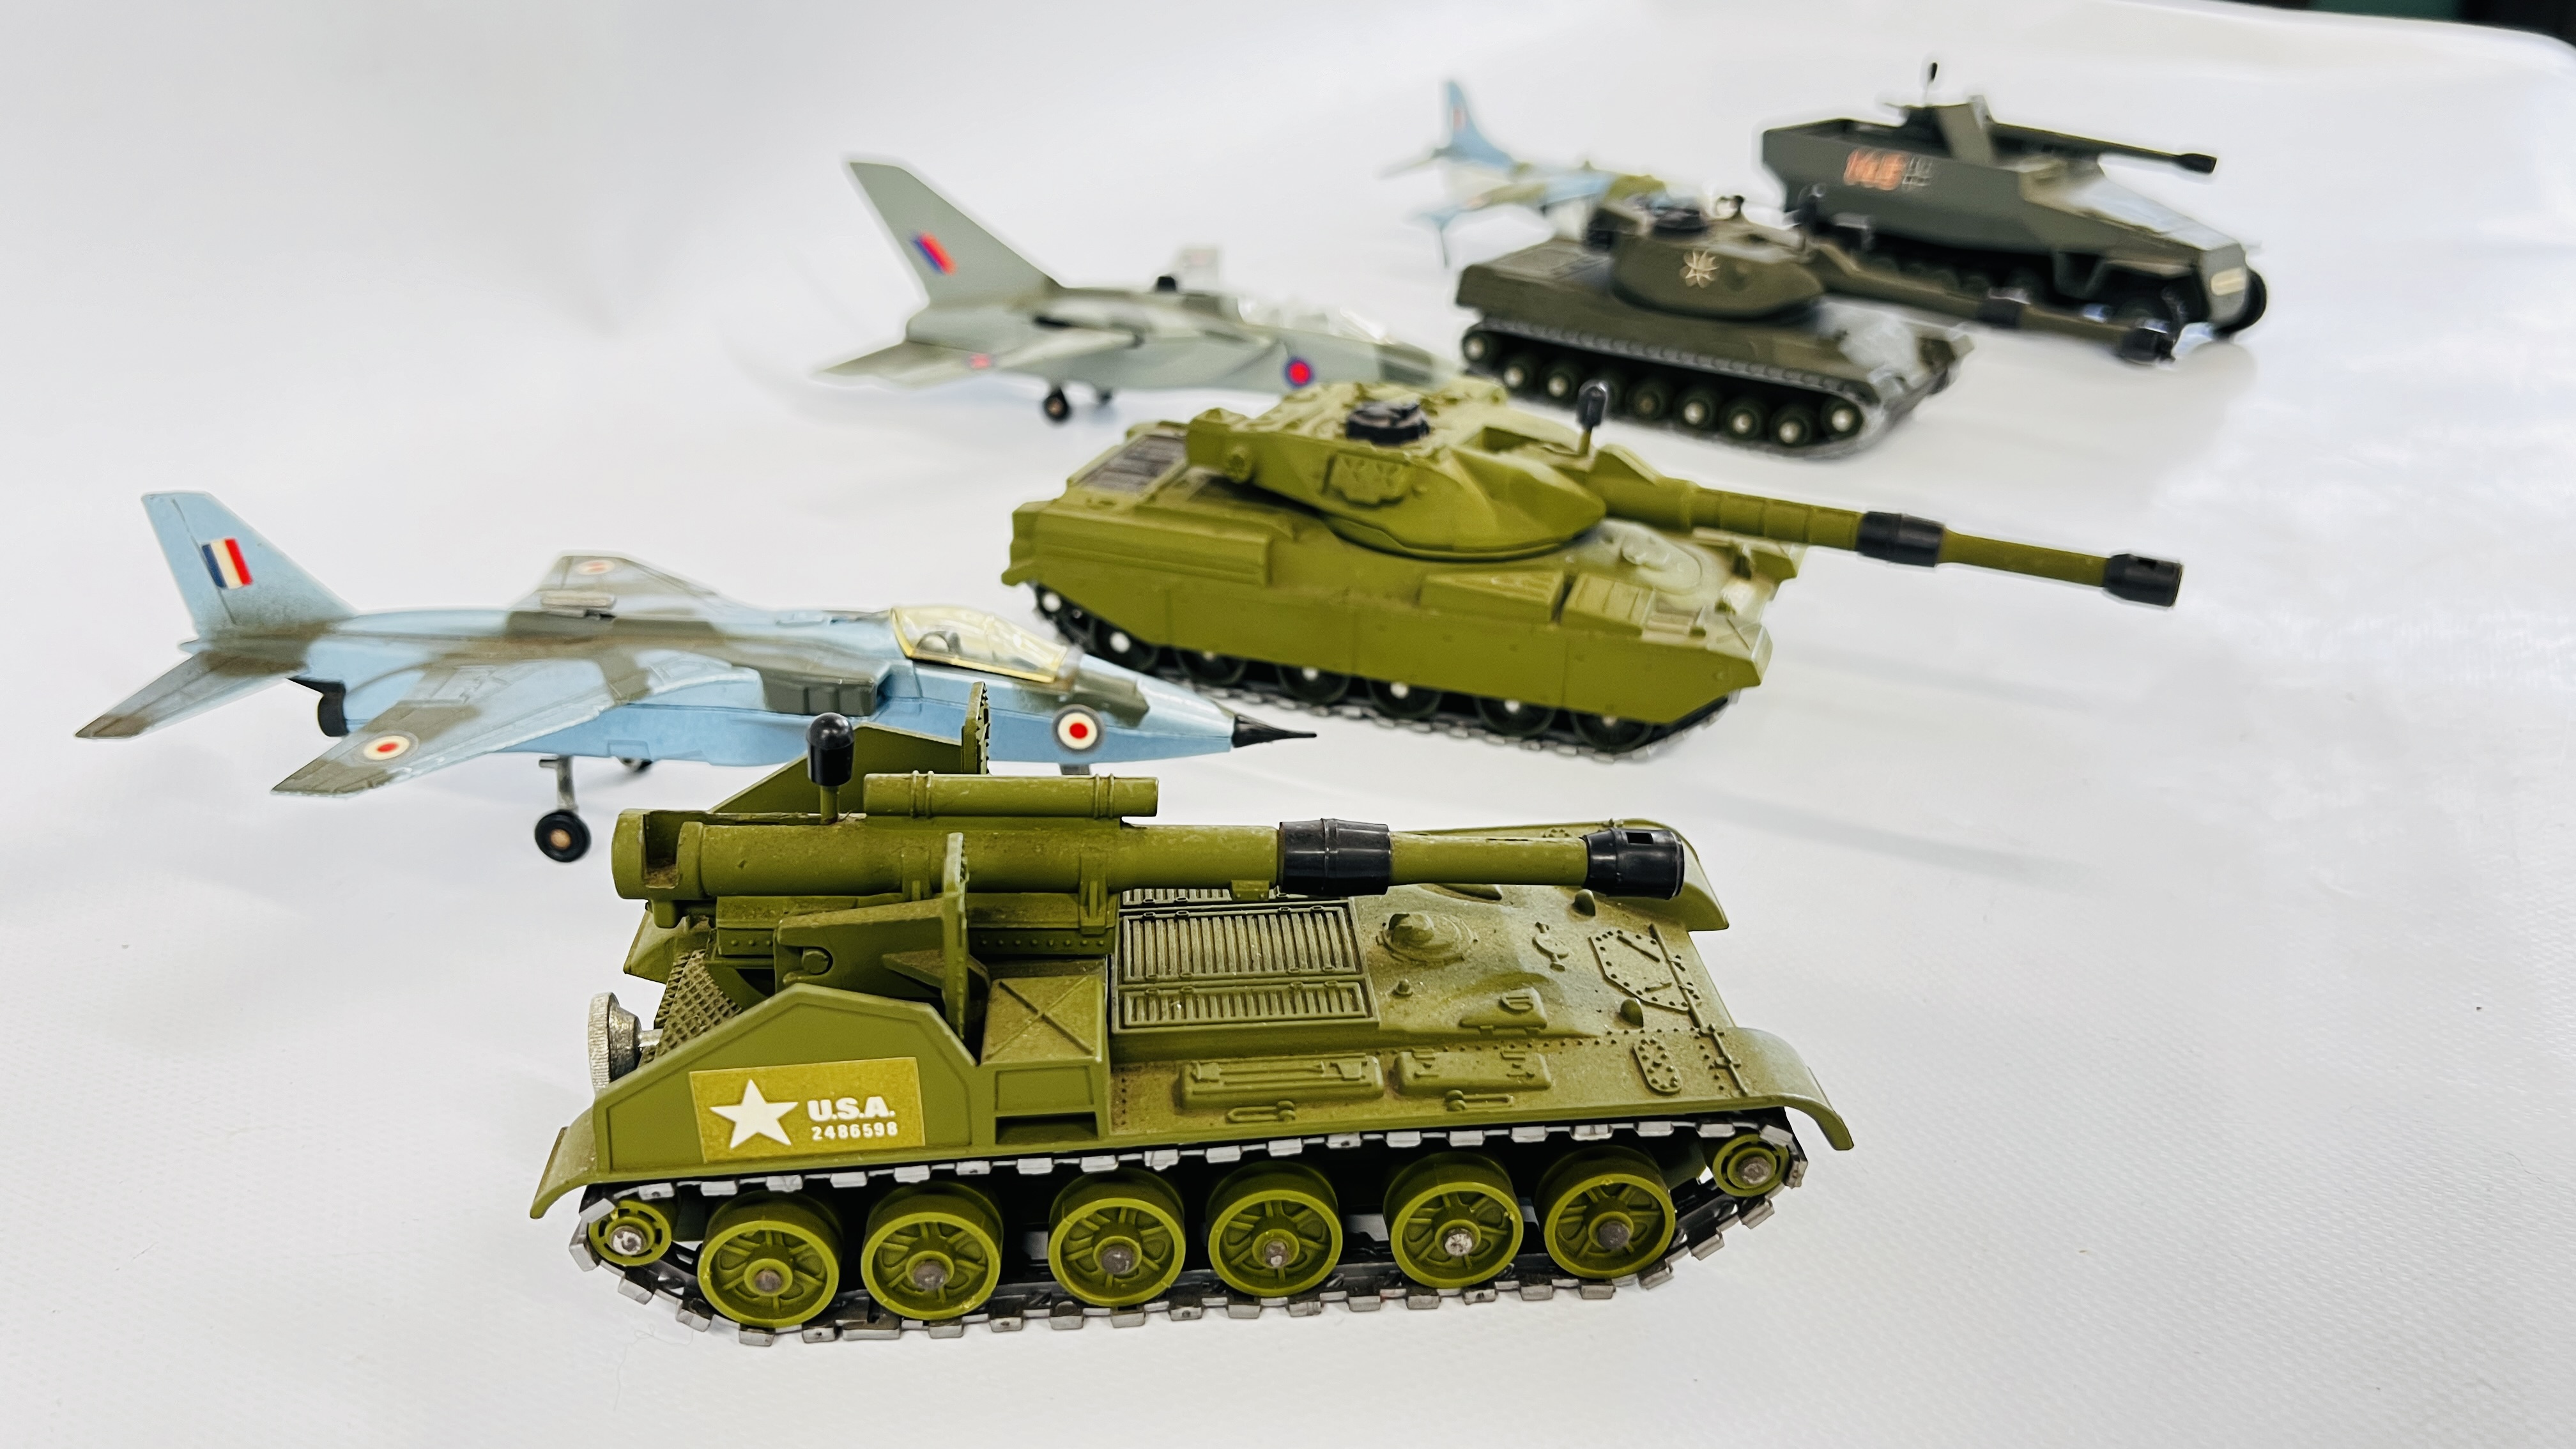 A GROUP OF 4 X DIE-CAST MILITARY DINKY TANKS ALONG WITH 4 X DIE-CAST DINKY FIGHTER PLANES / JETS. - Image 8 of 8